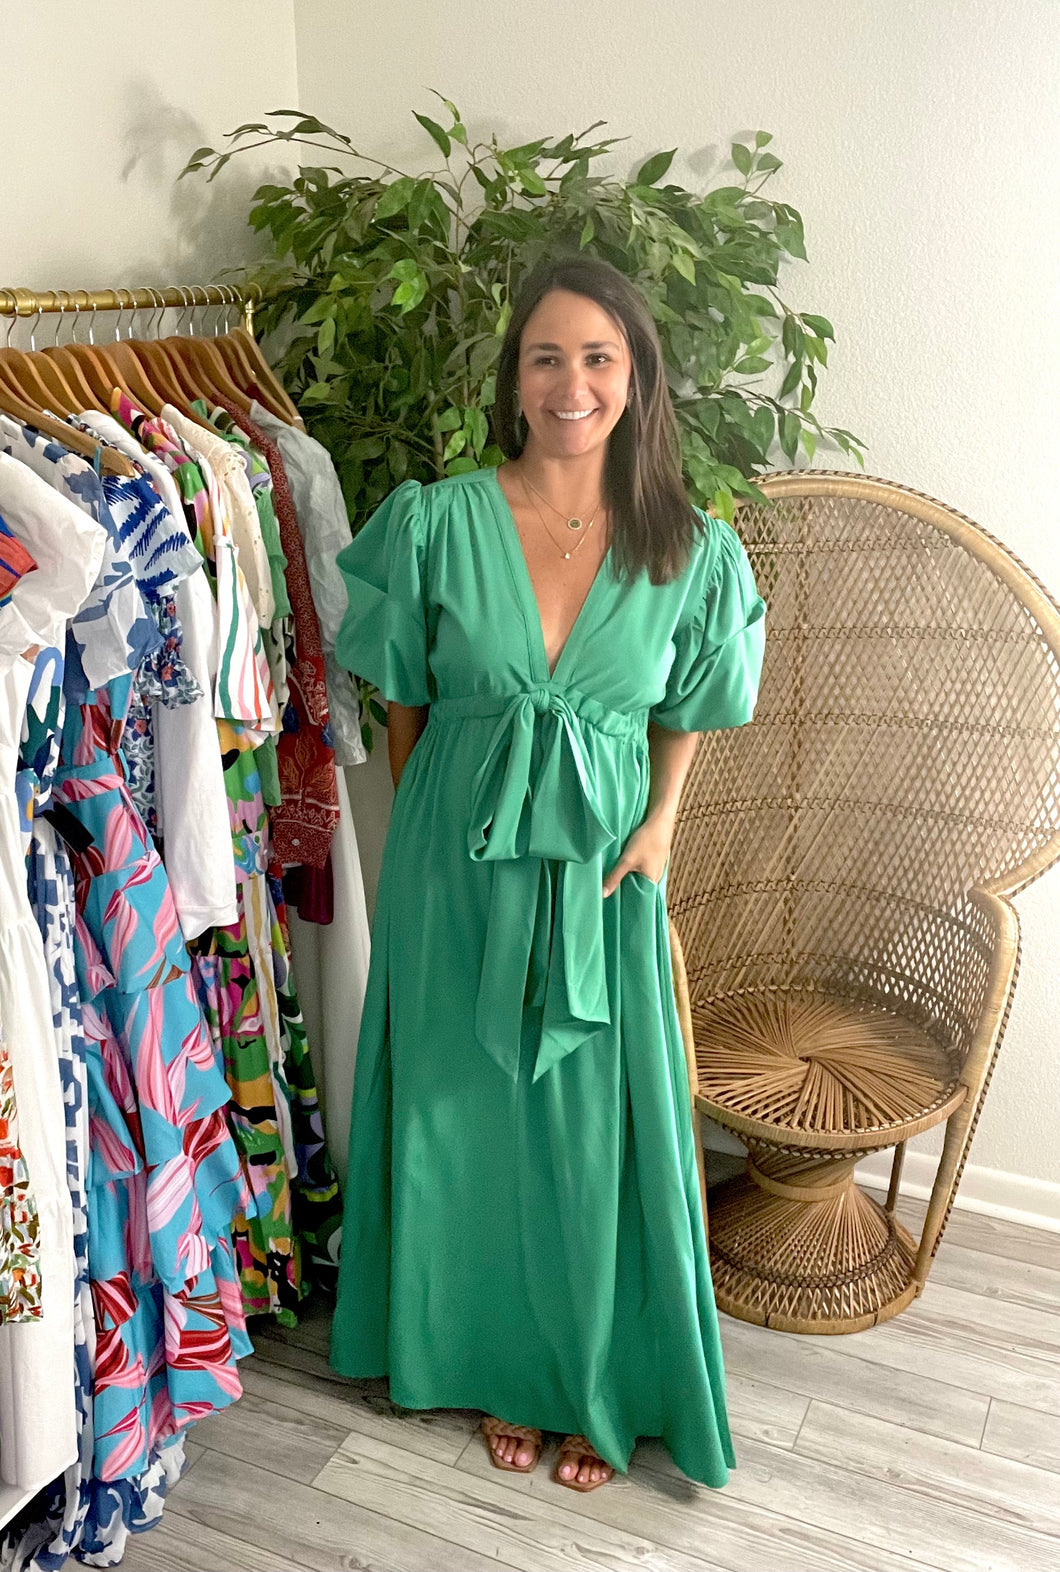 Kelly green maxi dress with pockets, exaggerated puff sleeves, elastic waist with adjustable drawstring tie at waist. Polyester silk blend.  Fits roomy, wearing size small.  Good for bump, post bump or no bump!